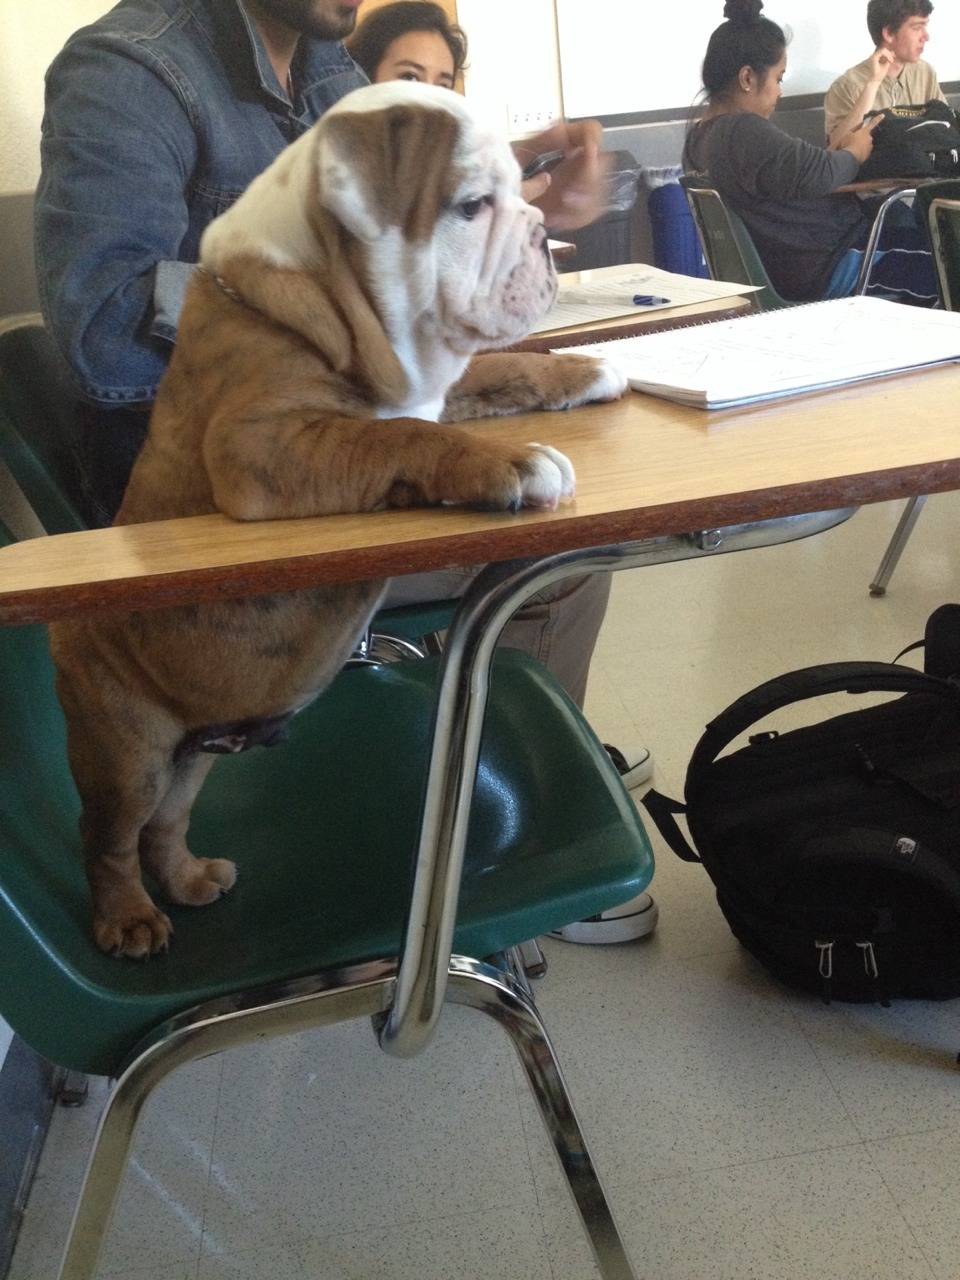 yoyosufo:
“ the-jaeger-pilot:
“ Chunk takes his education very seriously
”
His name is Chunk omg
”